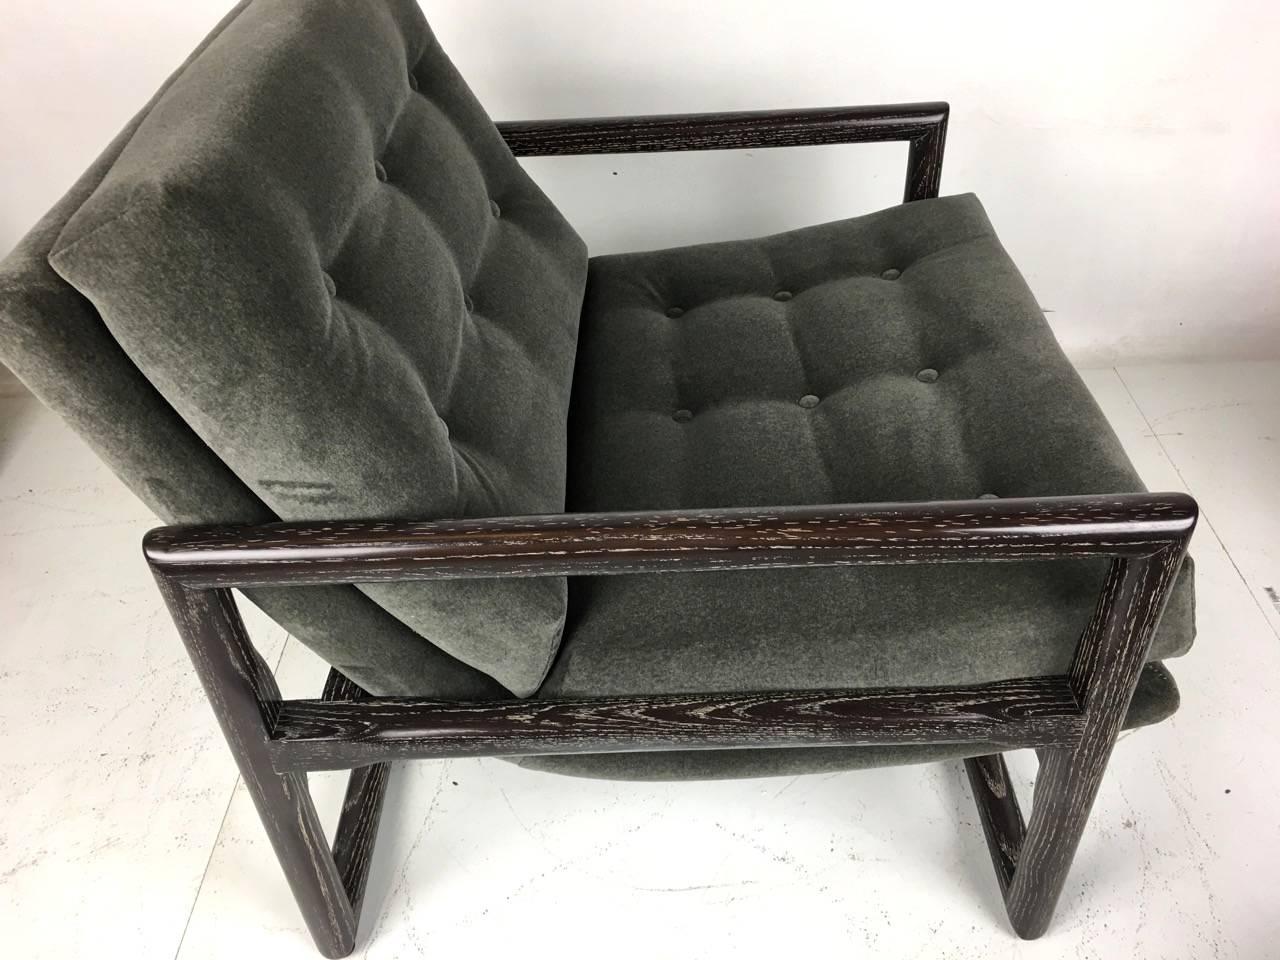 American Scoop Chair and Ottoman